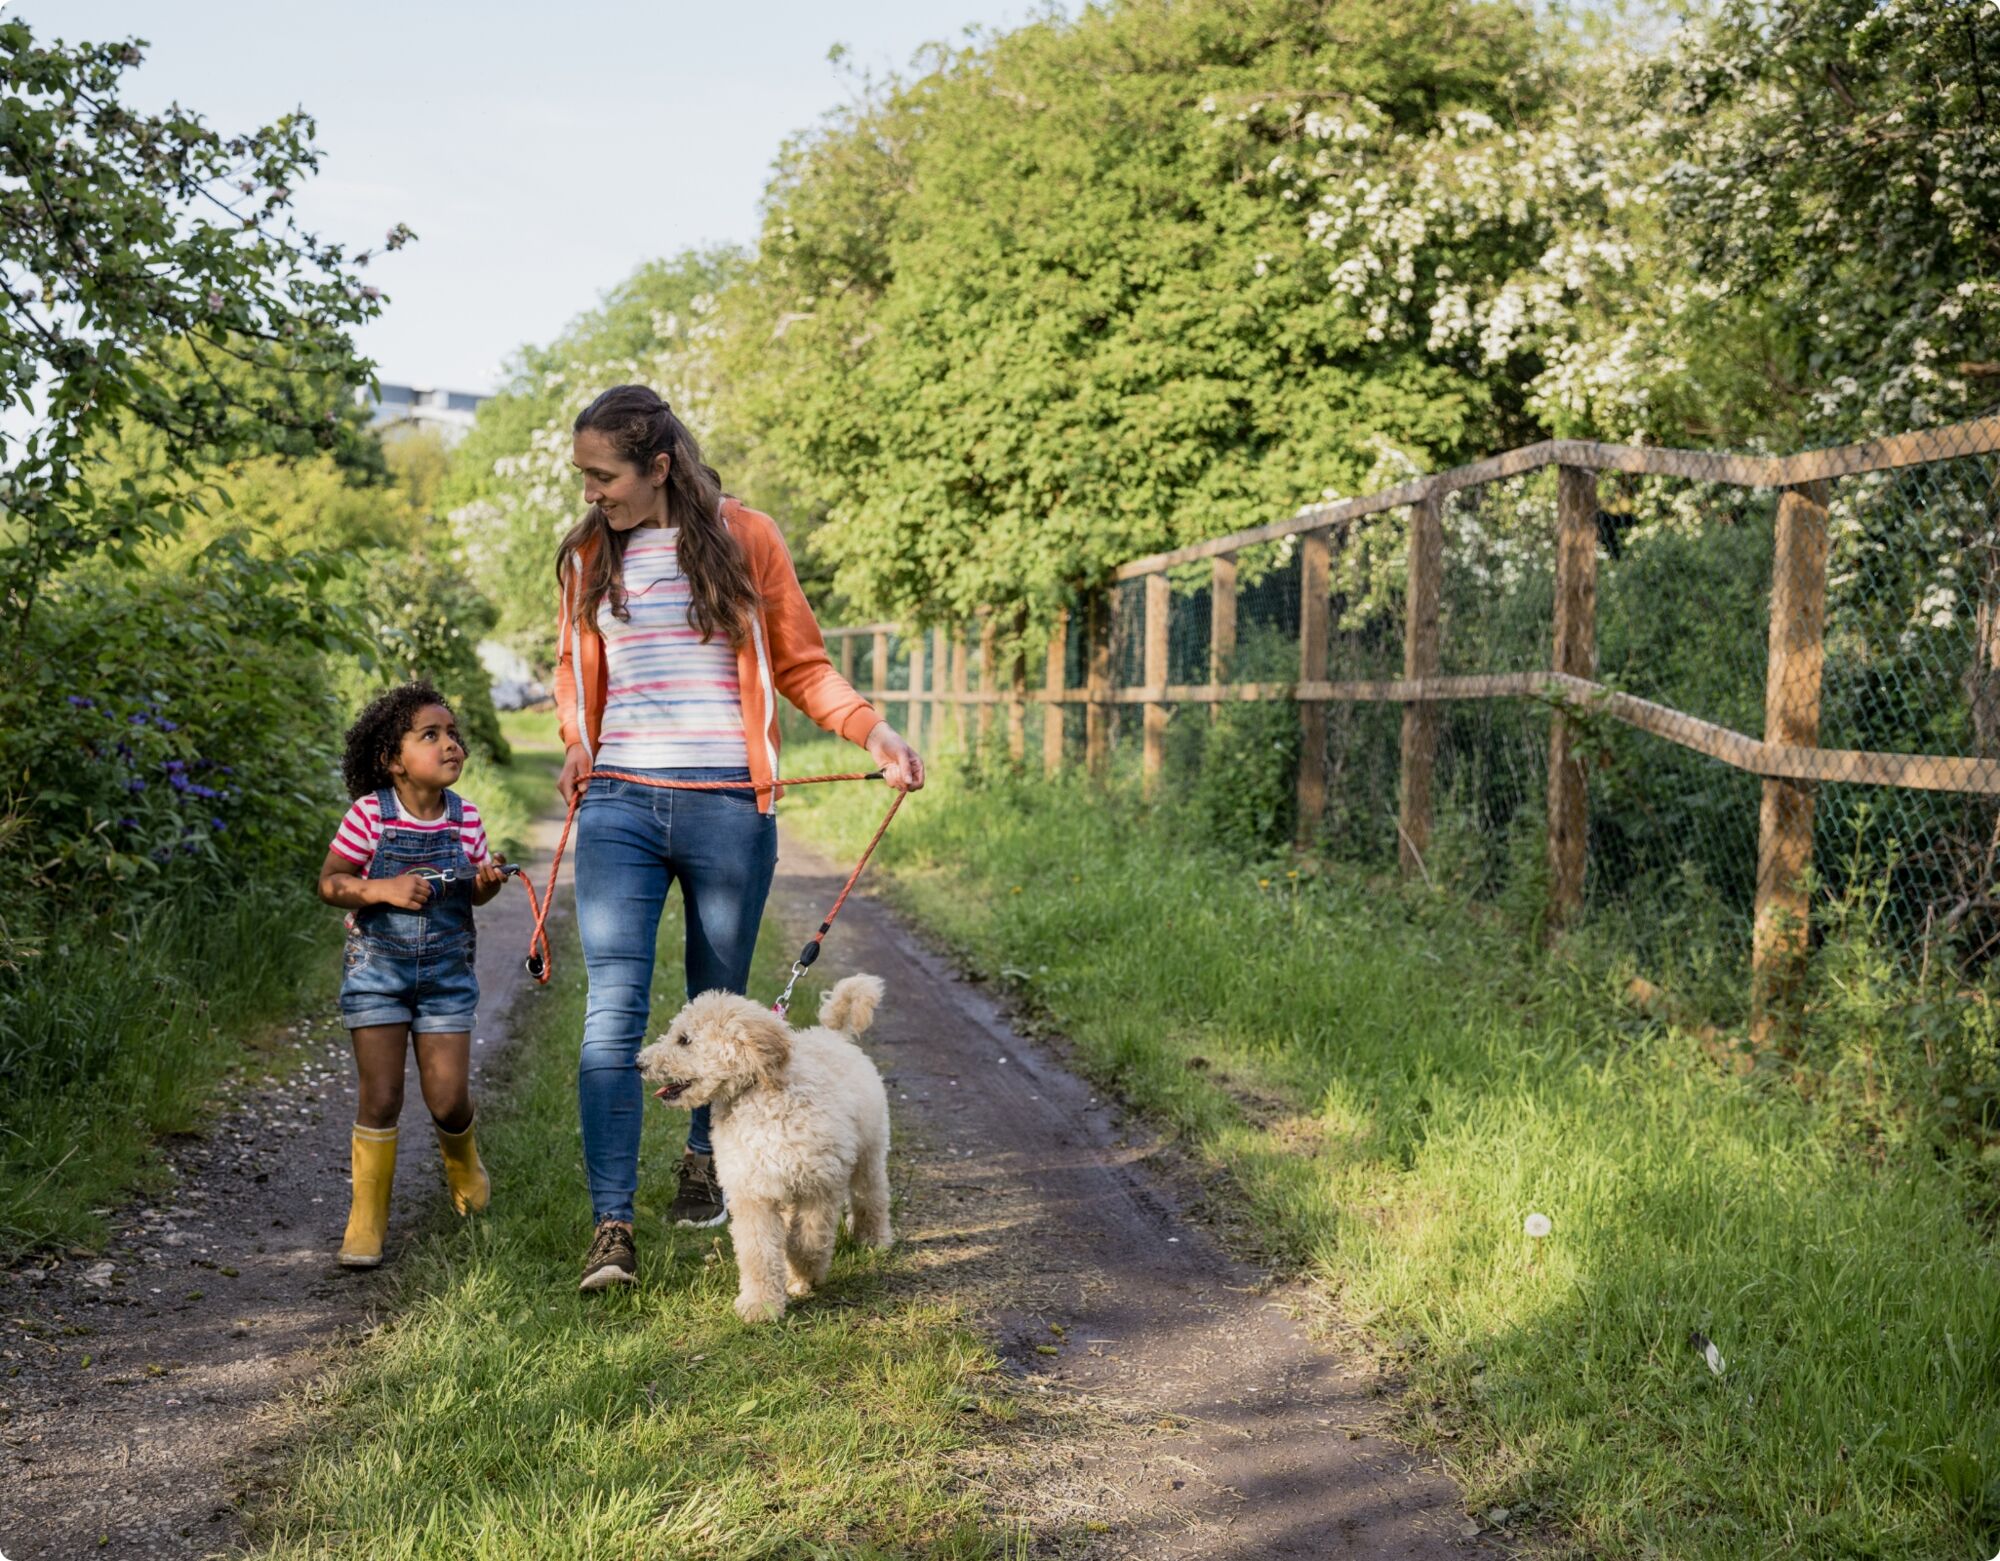 A mother and a daughter walking their dog on a country road